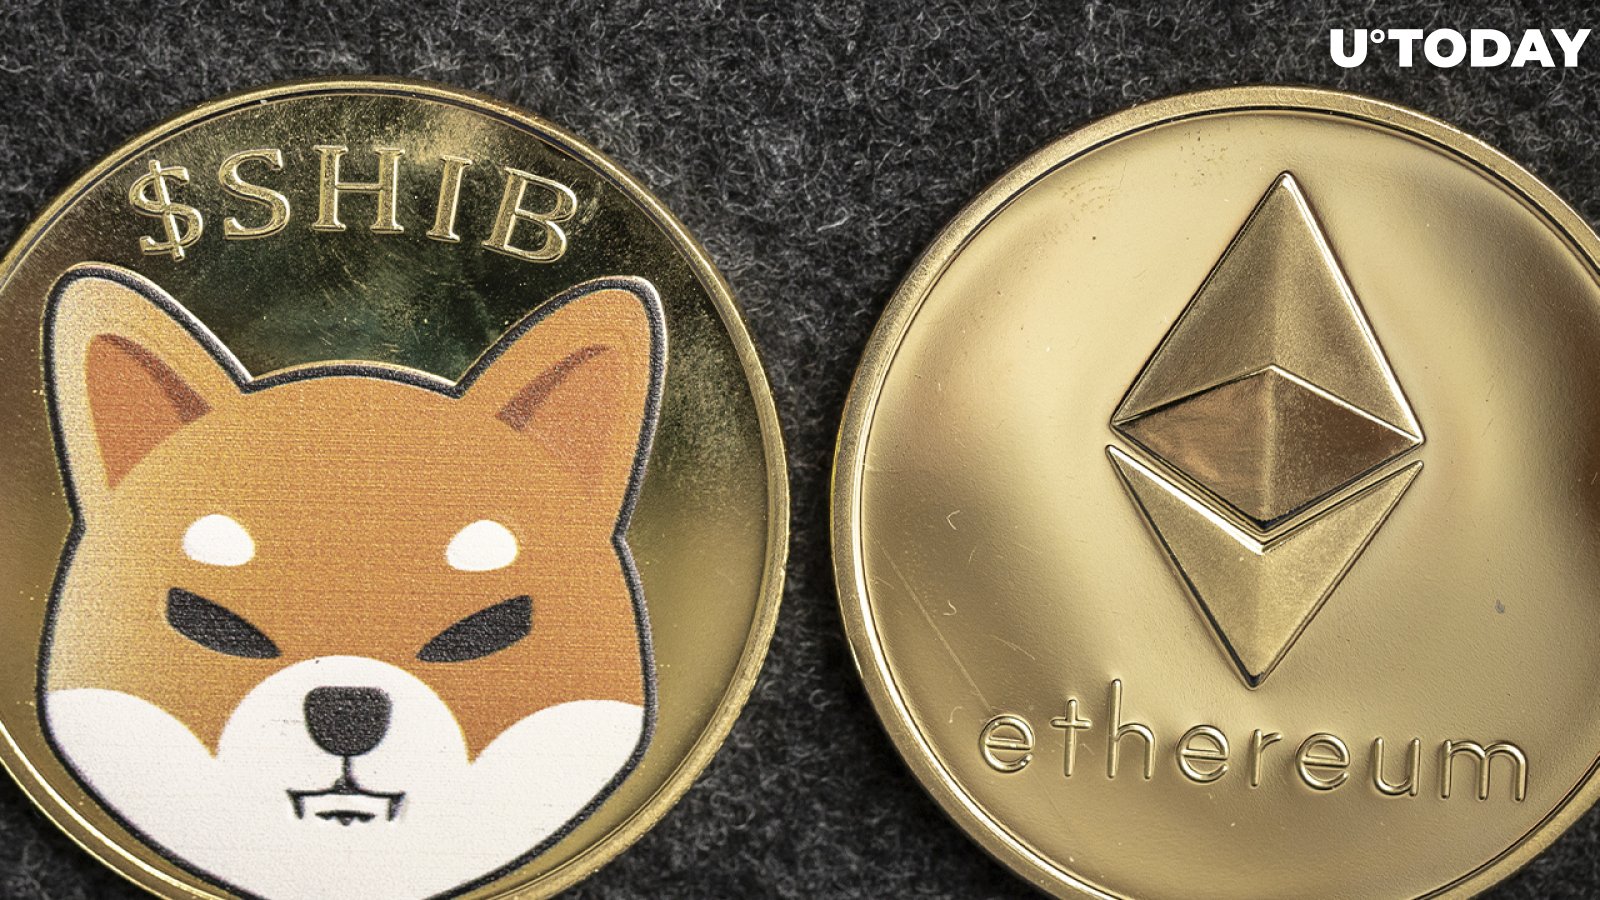 SHIB Gains Traction Among ETH Whales, Becoming Most Used Smart Contract for Them